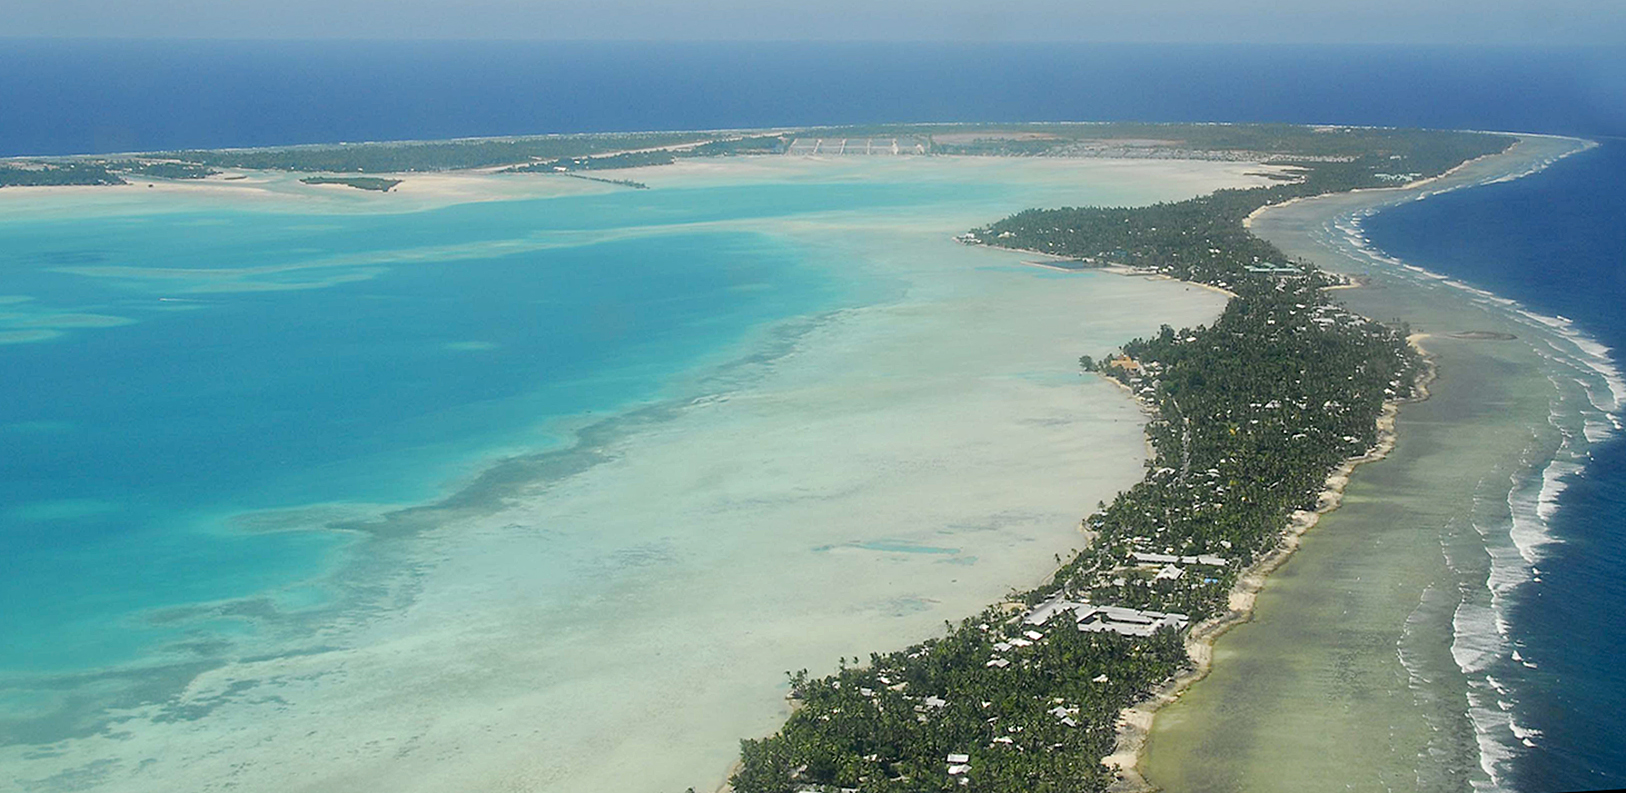 An image of the Island of Tarawa, part of the Republic of Kiribati in the Central Pacific.